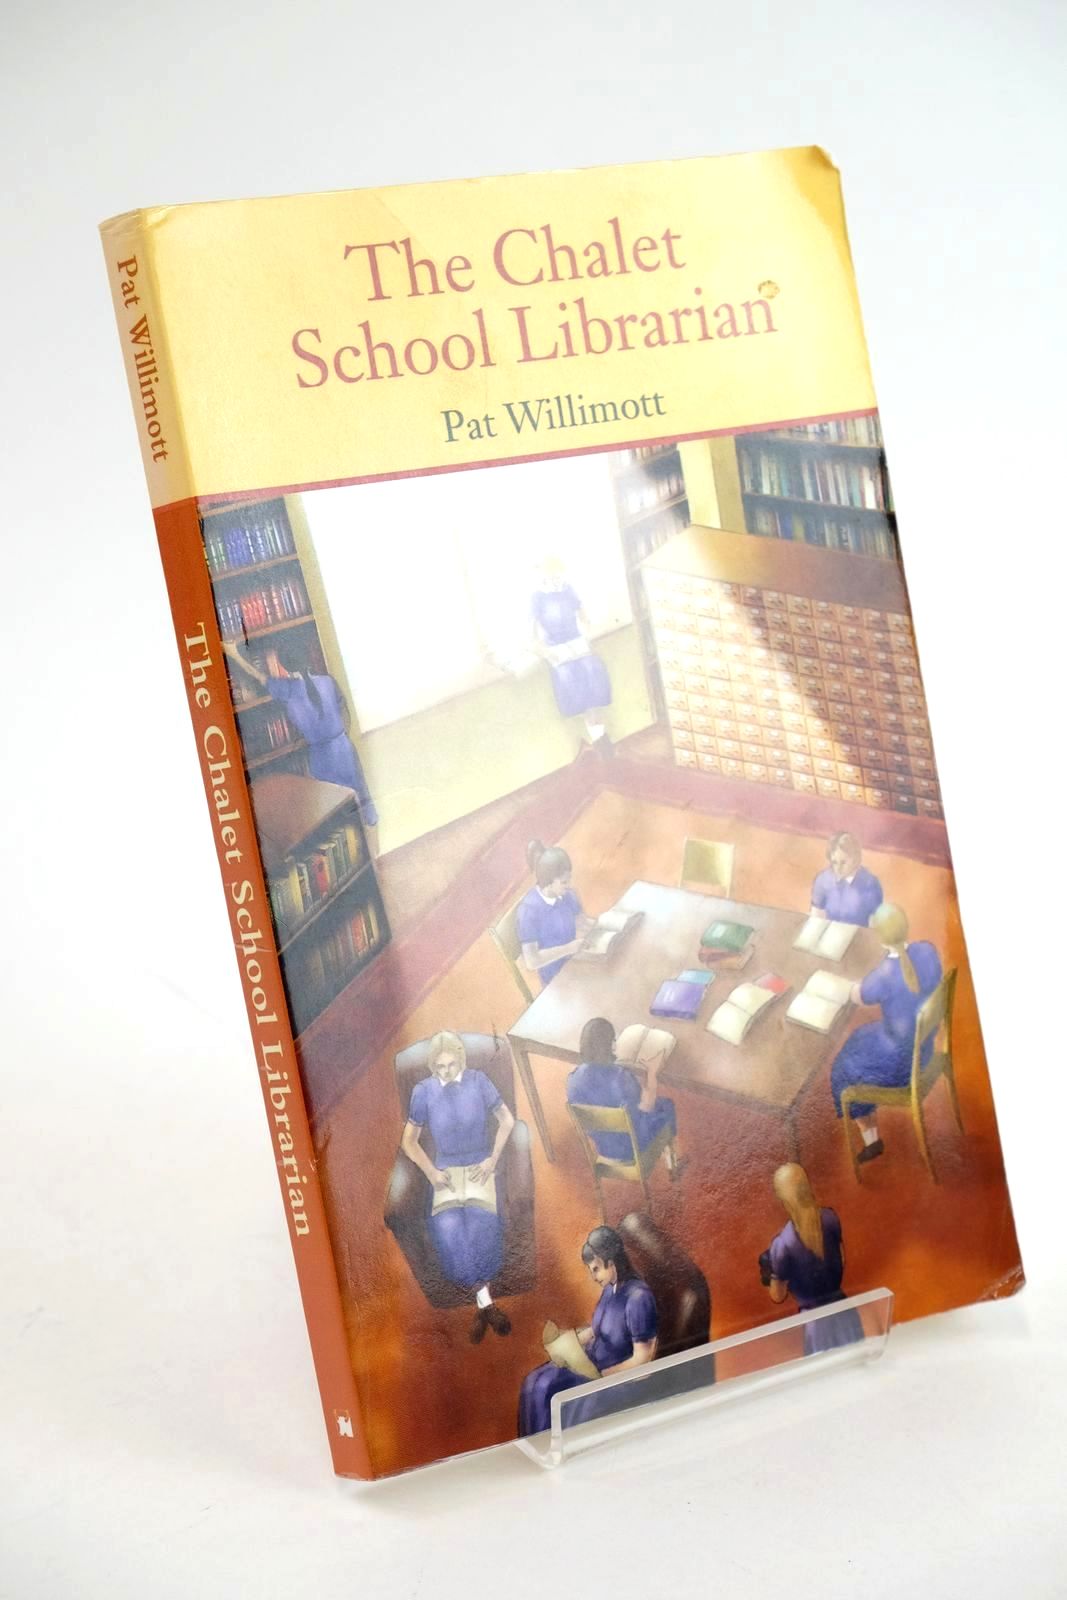 Photo of THE CHALET SCHOOL LIBRARIAN written by Willimott, Pat published by Matador (STOCK CODE: 1323984)  for sale by Stella & Rose's Books